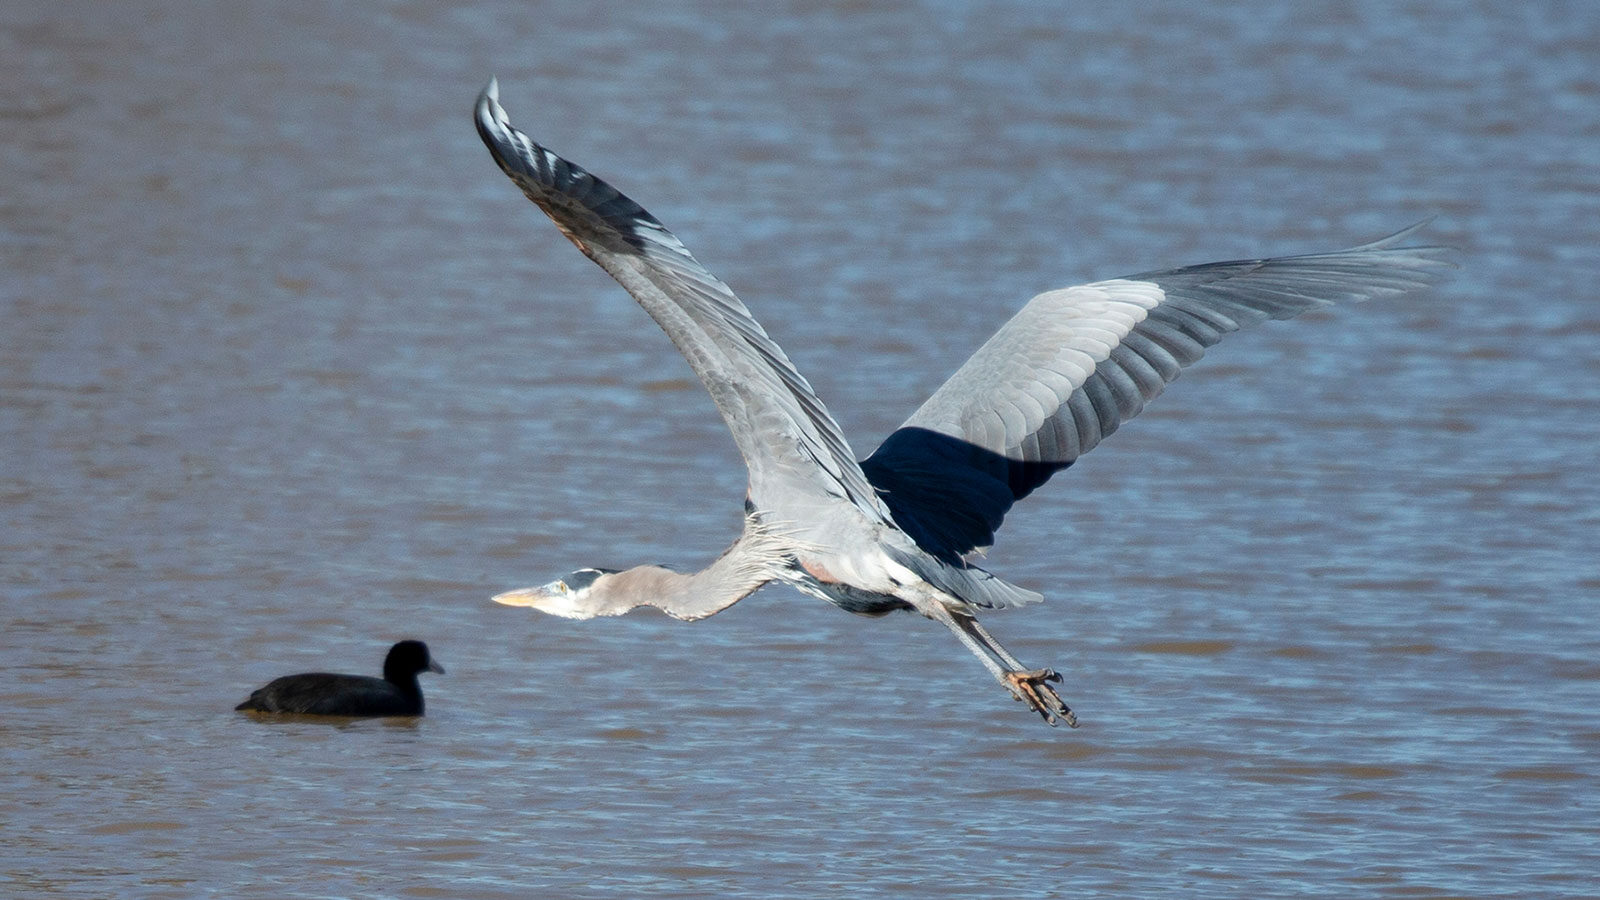 Great blue heron in flight over an American coot in water